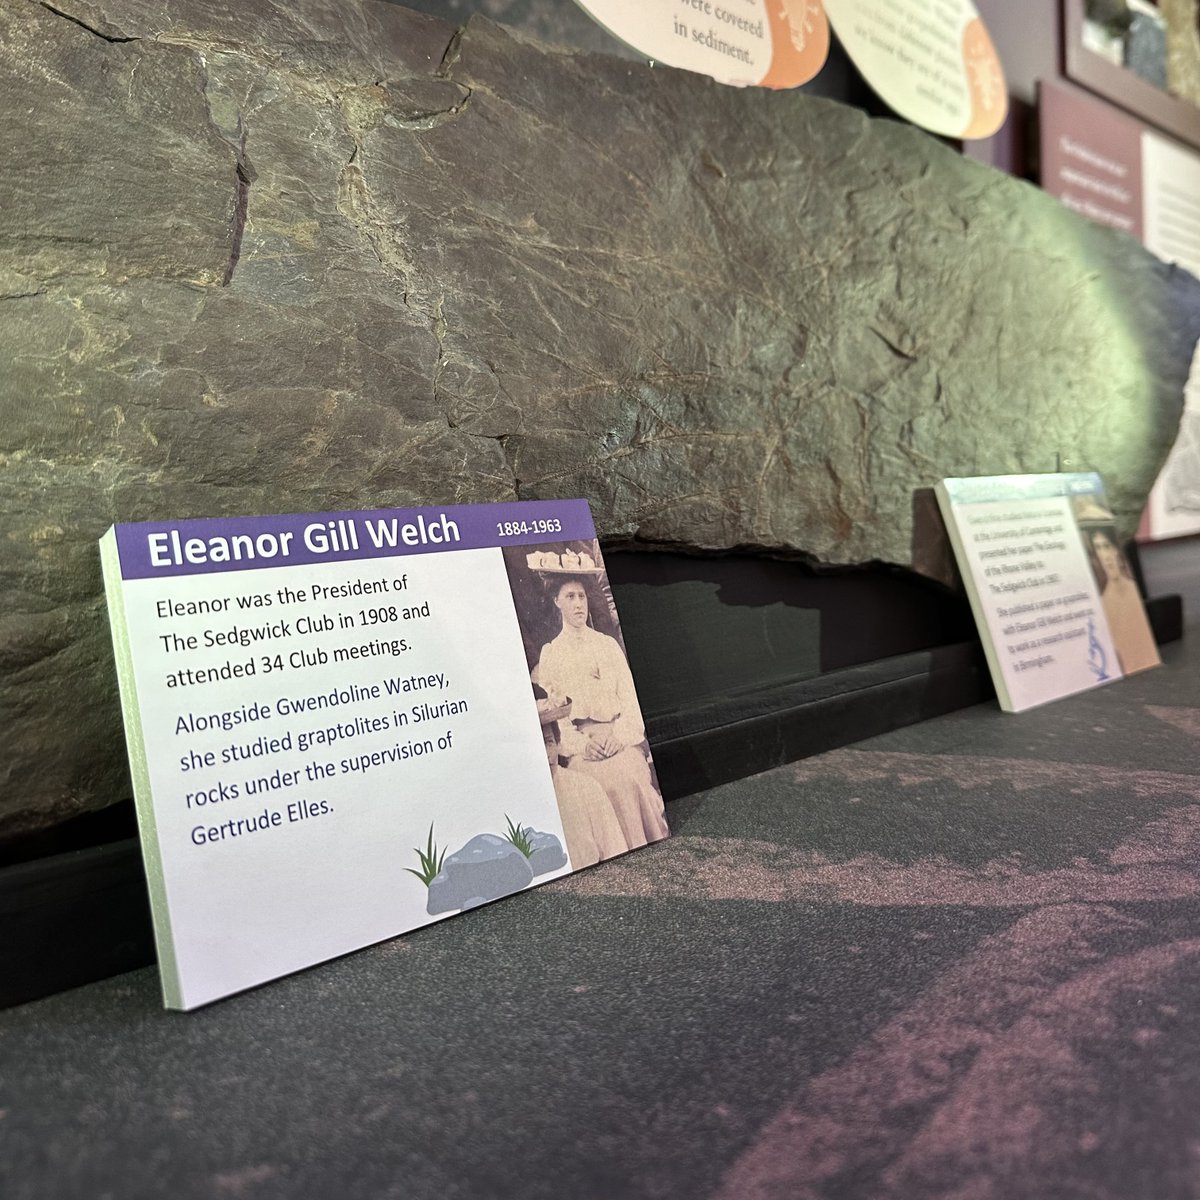 Happy #InternationalWomensDay ! Have you spotted these labels around the museum? They highlight the contributions of women to our collections and to the discipline of Earth Sciences. They were written and designed by two women Cambridge Earth Science students. #WomeninSTEM